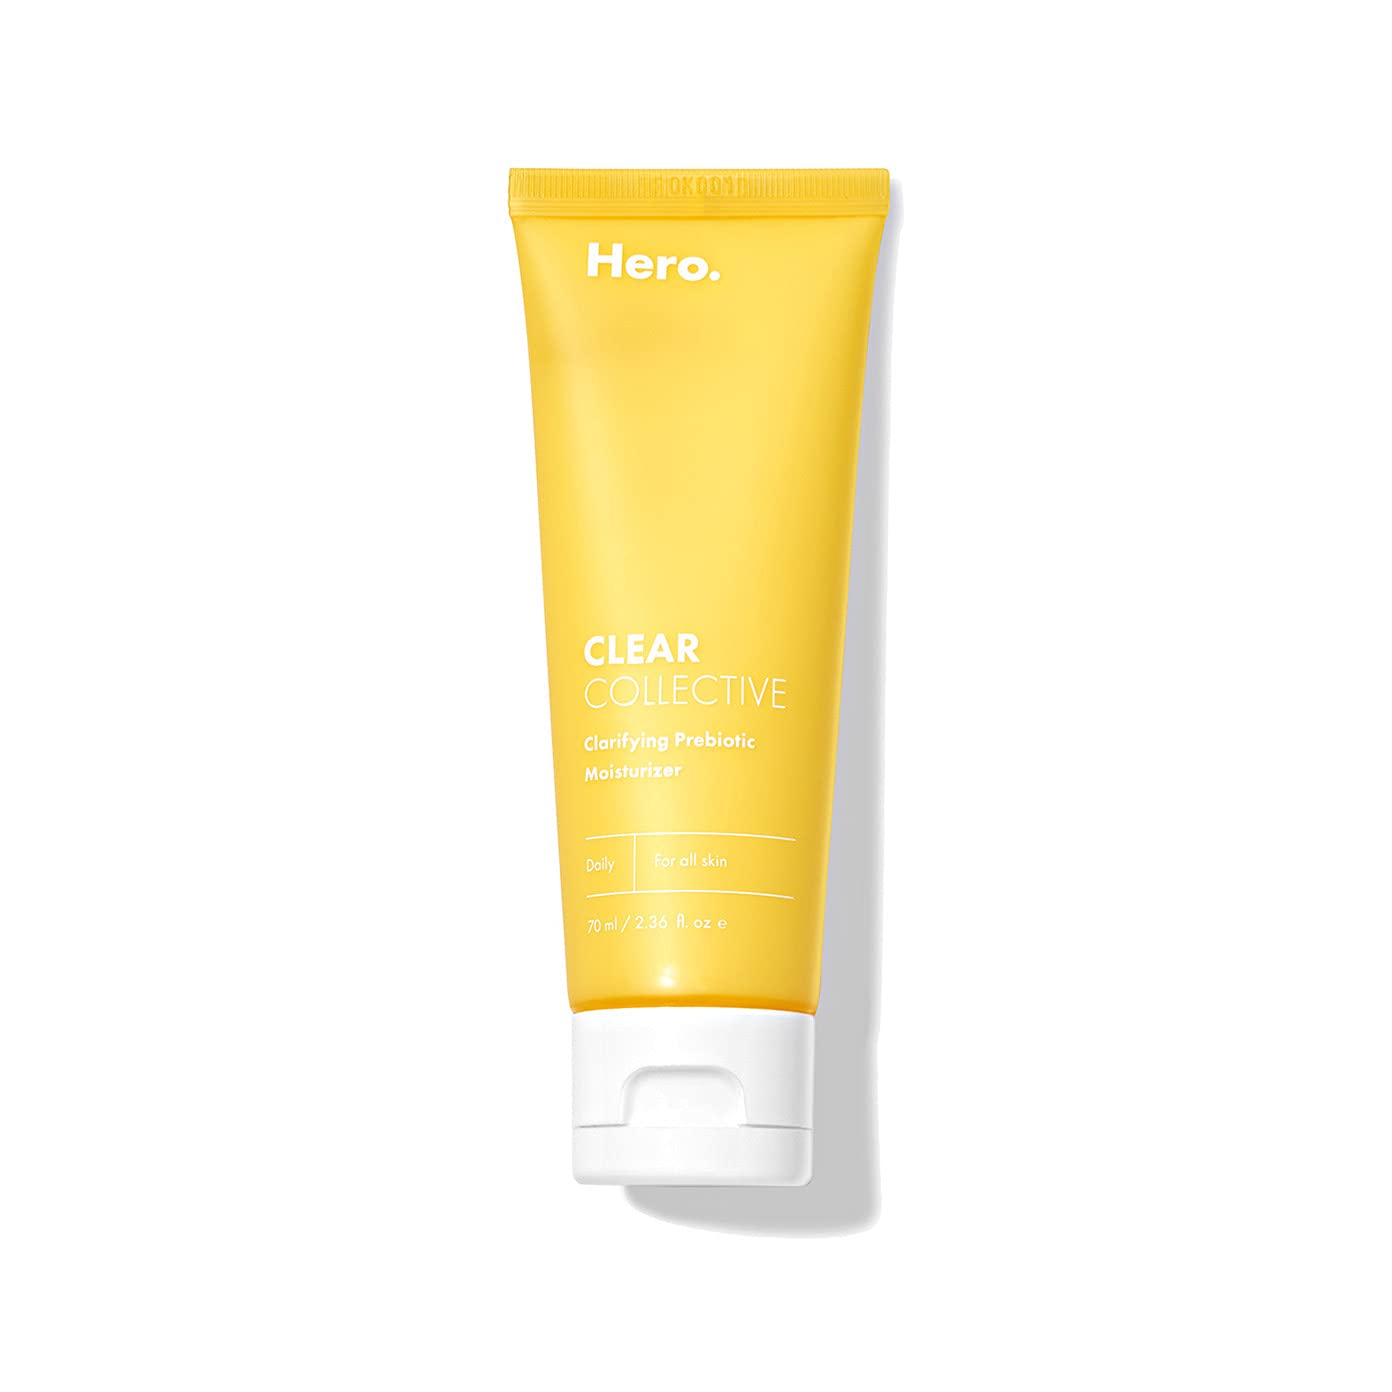 Clear Collective Clarifying Prebiotic Moisturizer